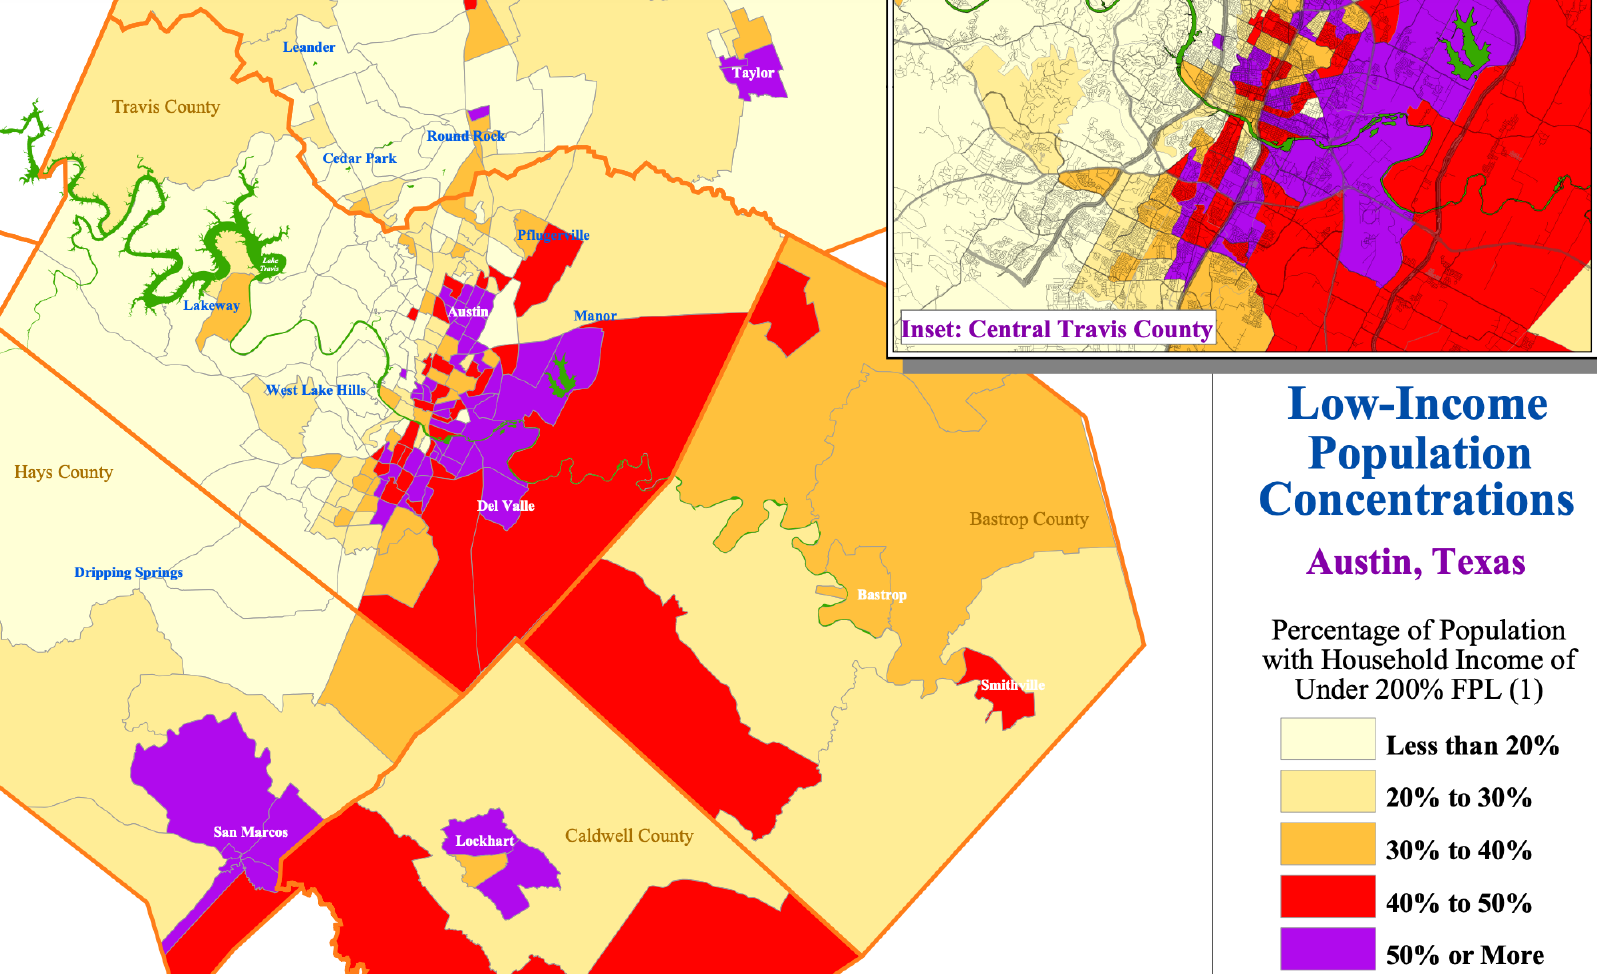 City of Austin map of low-income population concentrations.